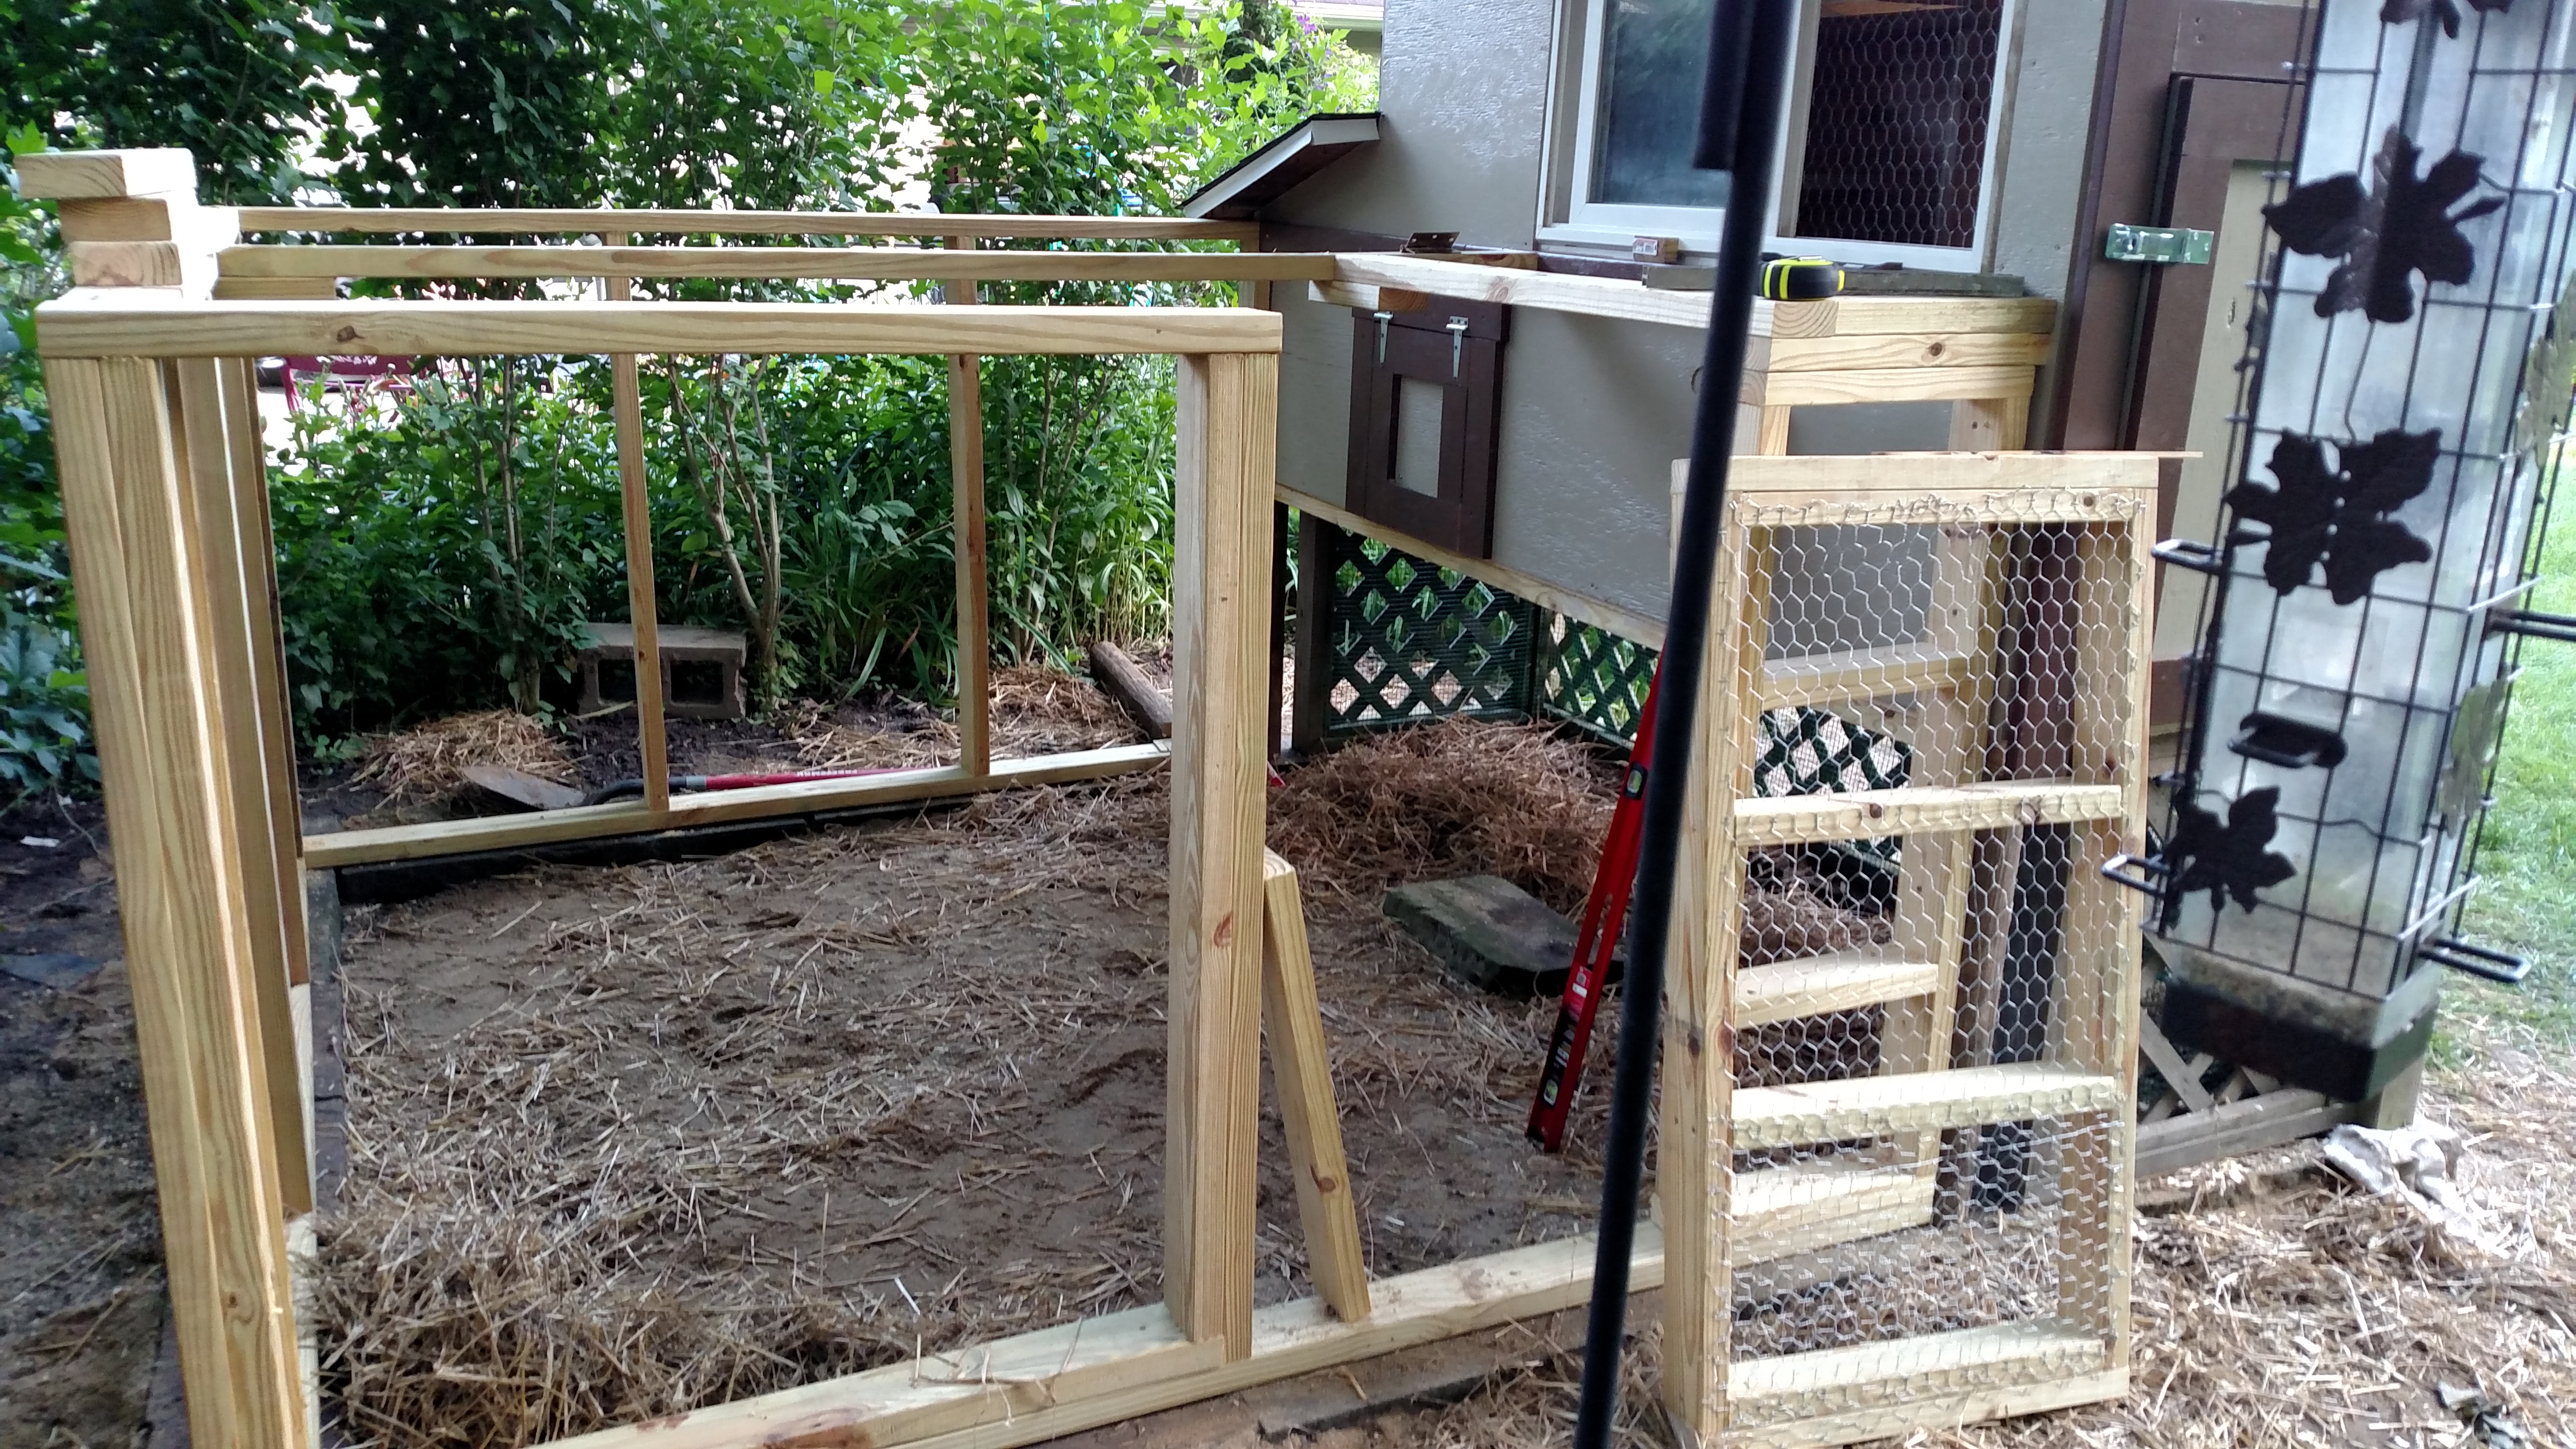 attached run before fencing was added, the coop is raised 36" to give additional shelter in summer and during rain